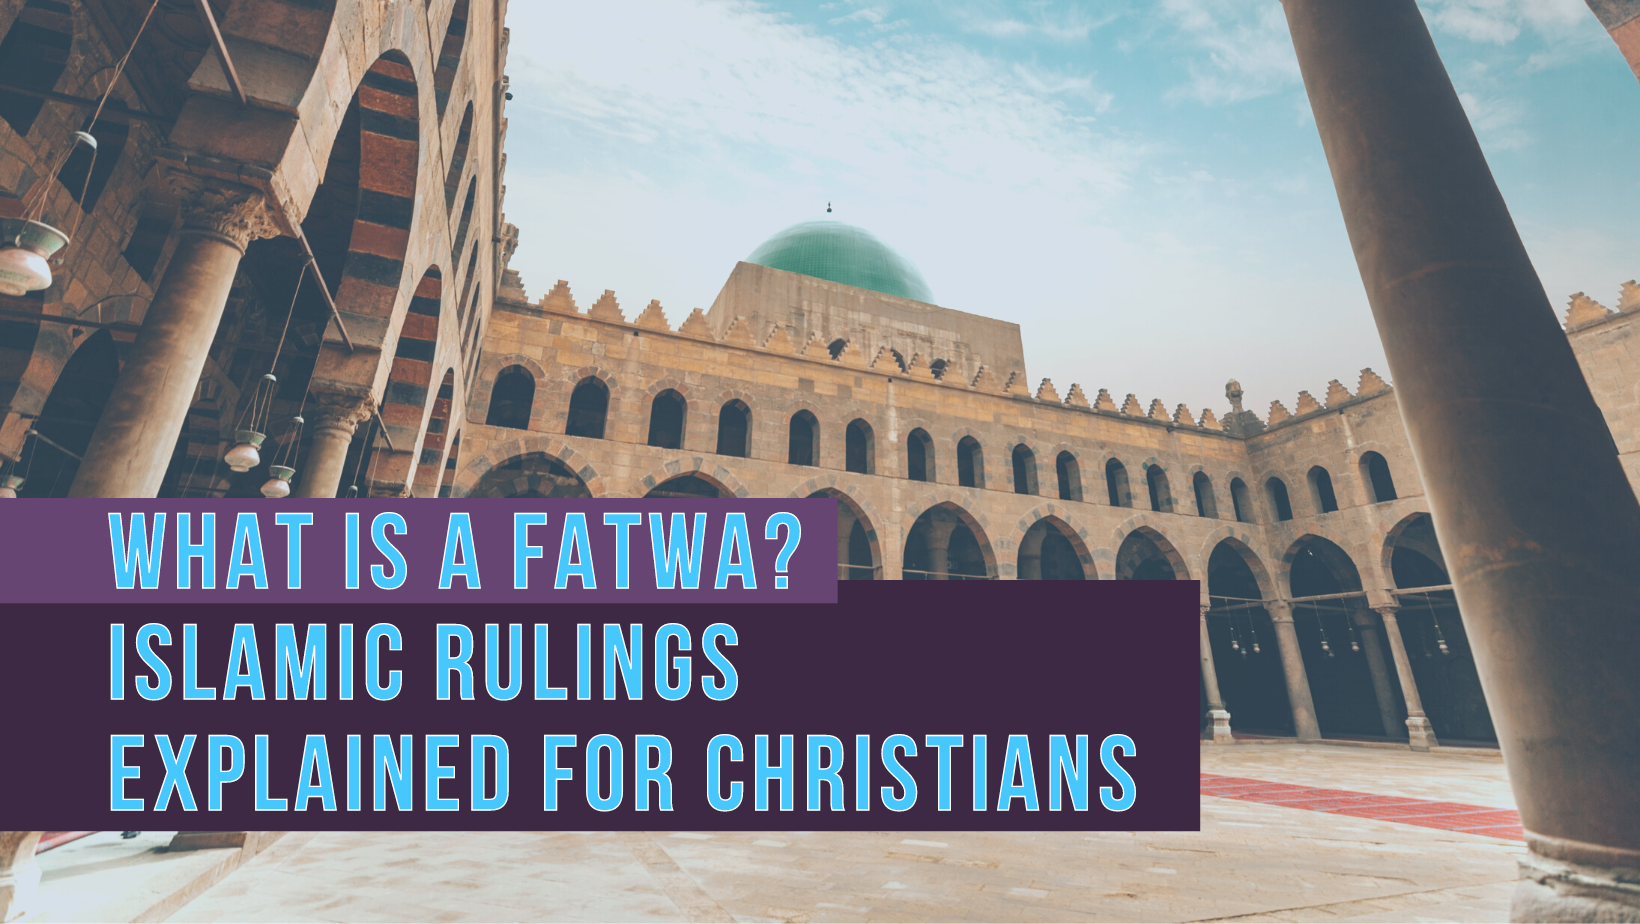 What is a fatwa? Islamic rulings explained for Christians